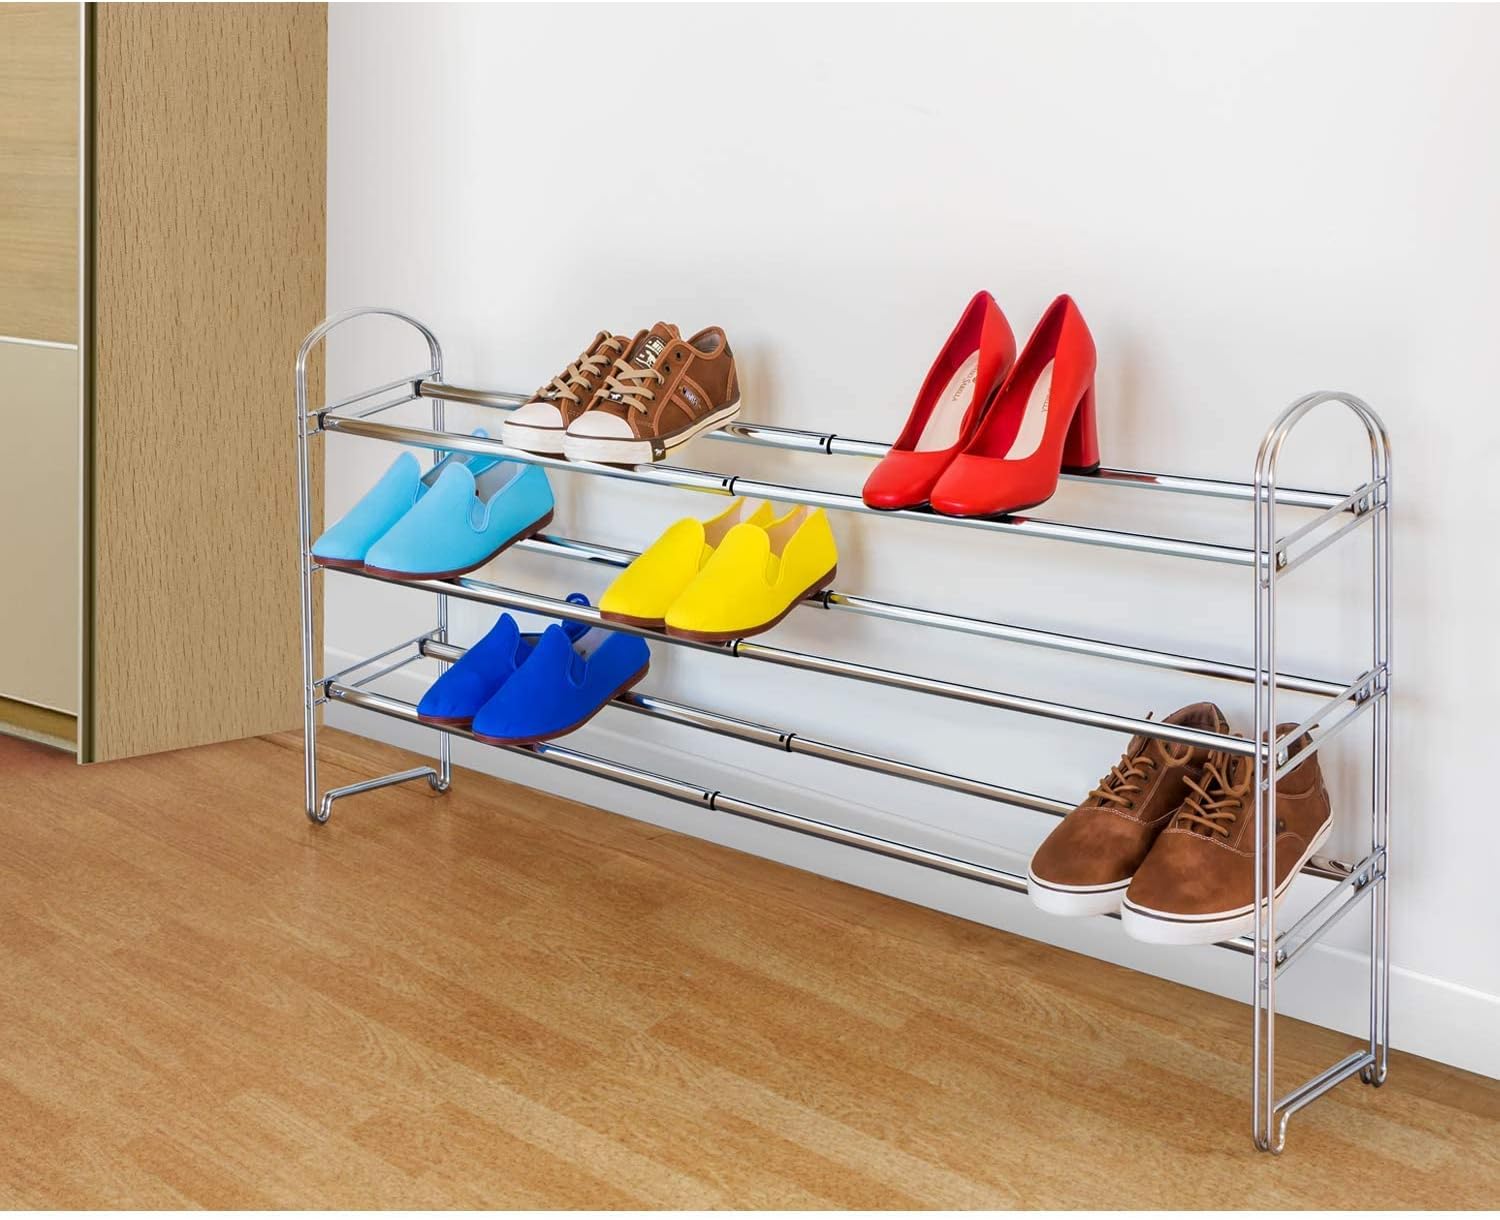 Tatkraft Maestro Heavy Duty 3 Tier Shoe Rack, Expandable Entryway Shoe Organizer, Easy to Assemble, Chrome Plated Steel 3 Tiers